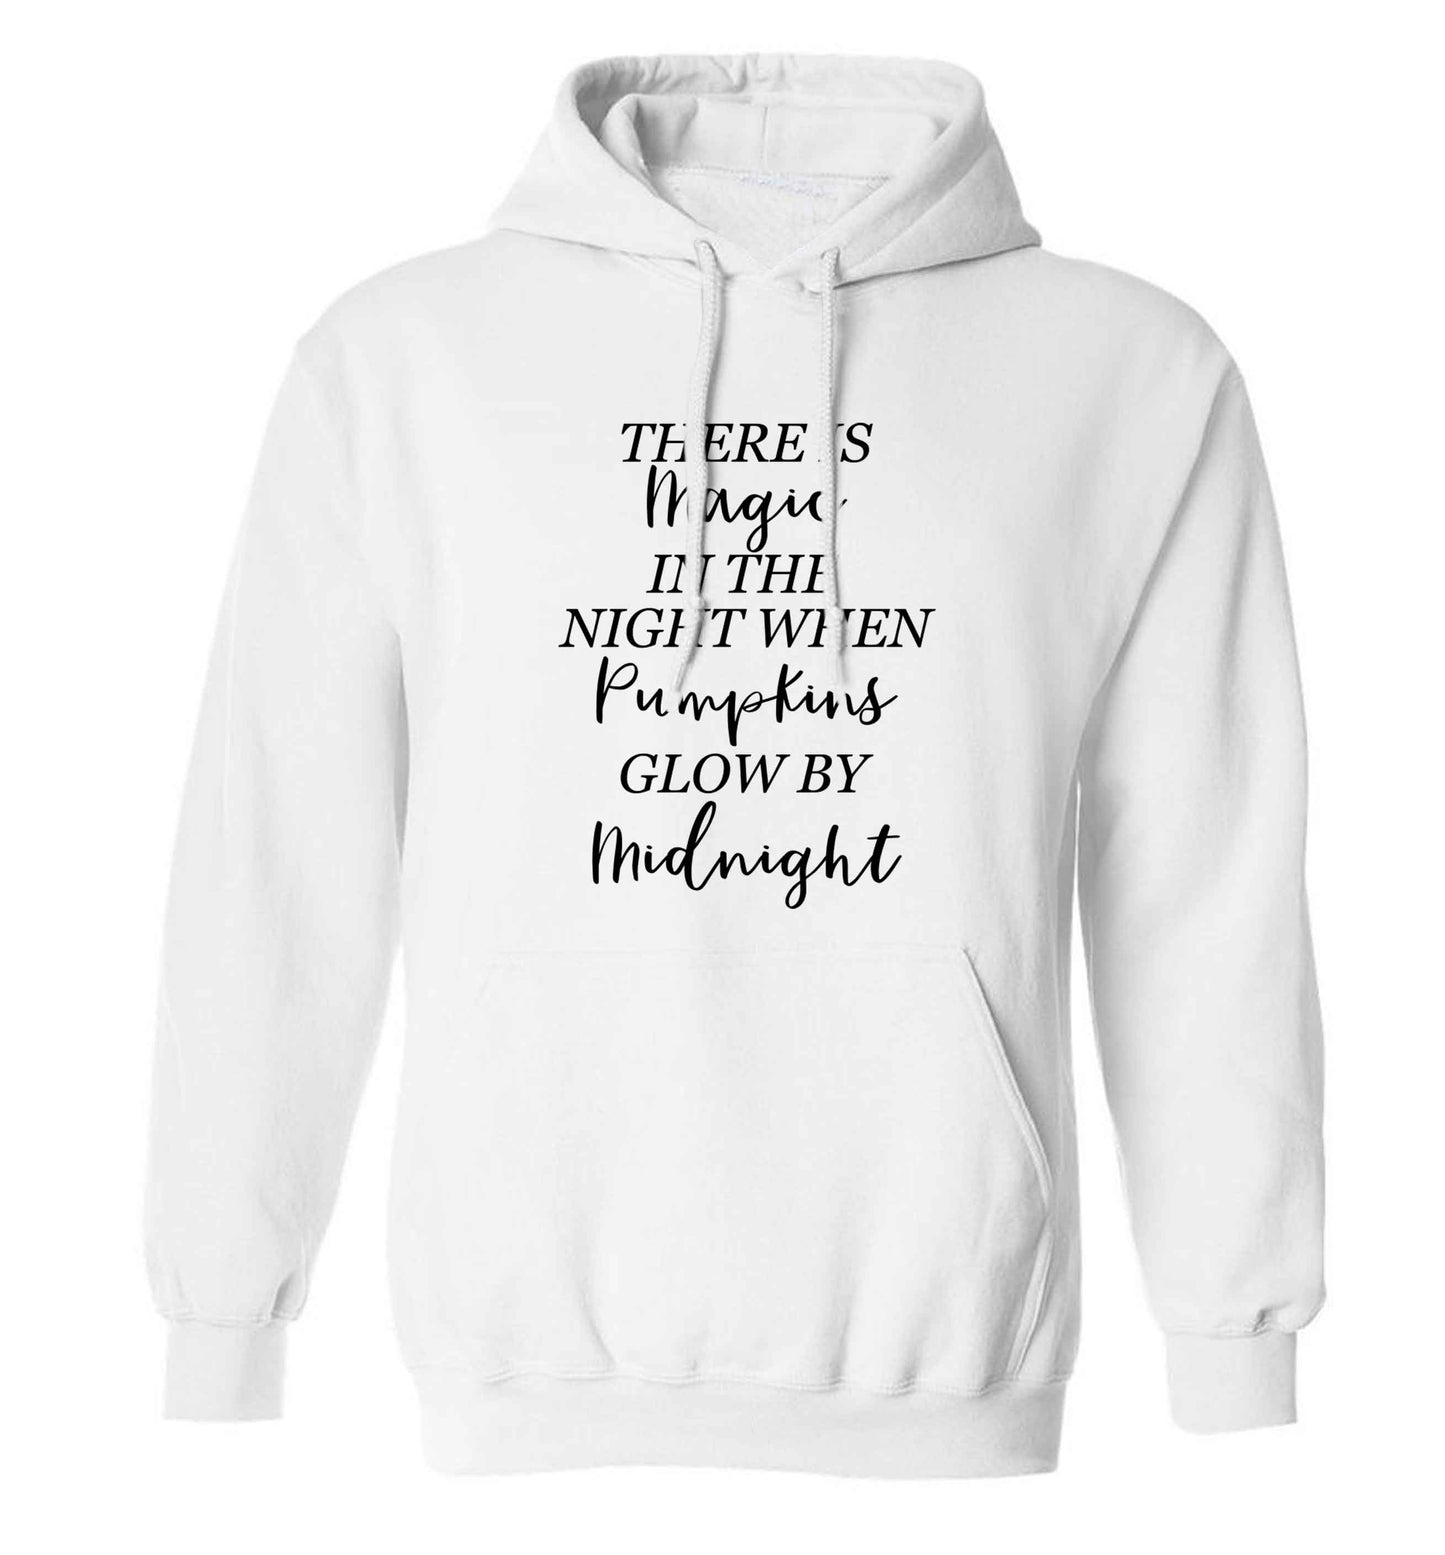 Magic in Night adults unisex white hoodie 2XL